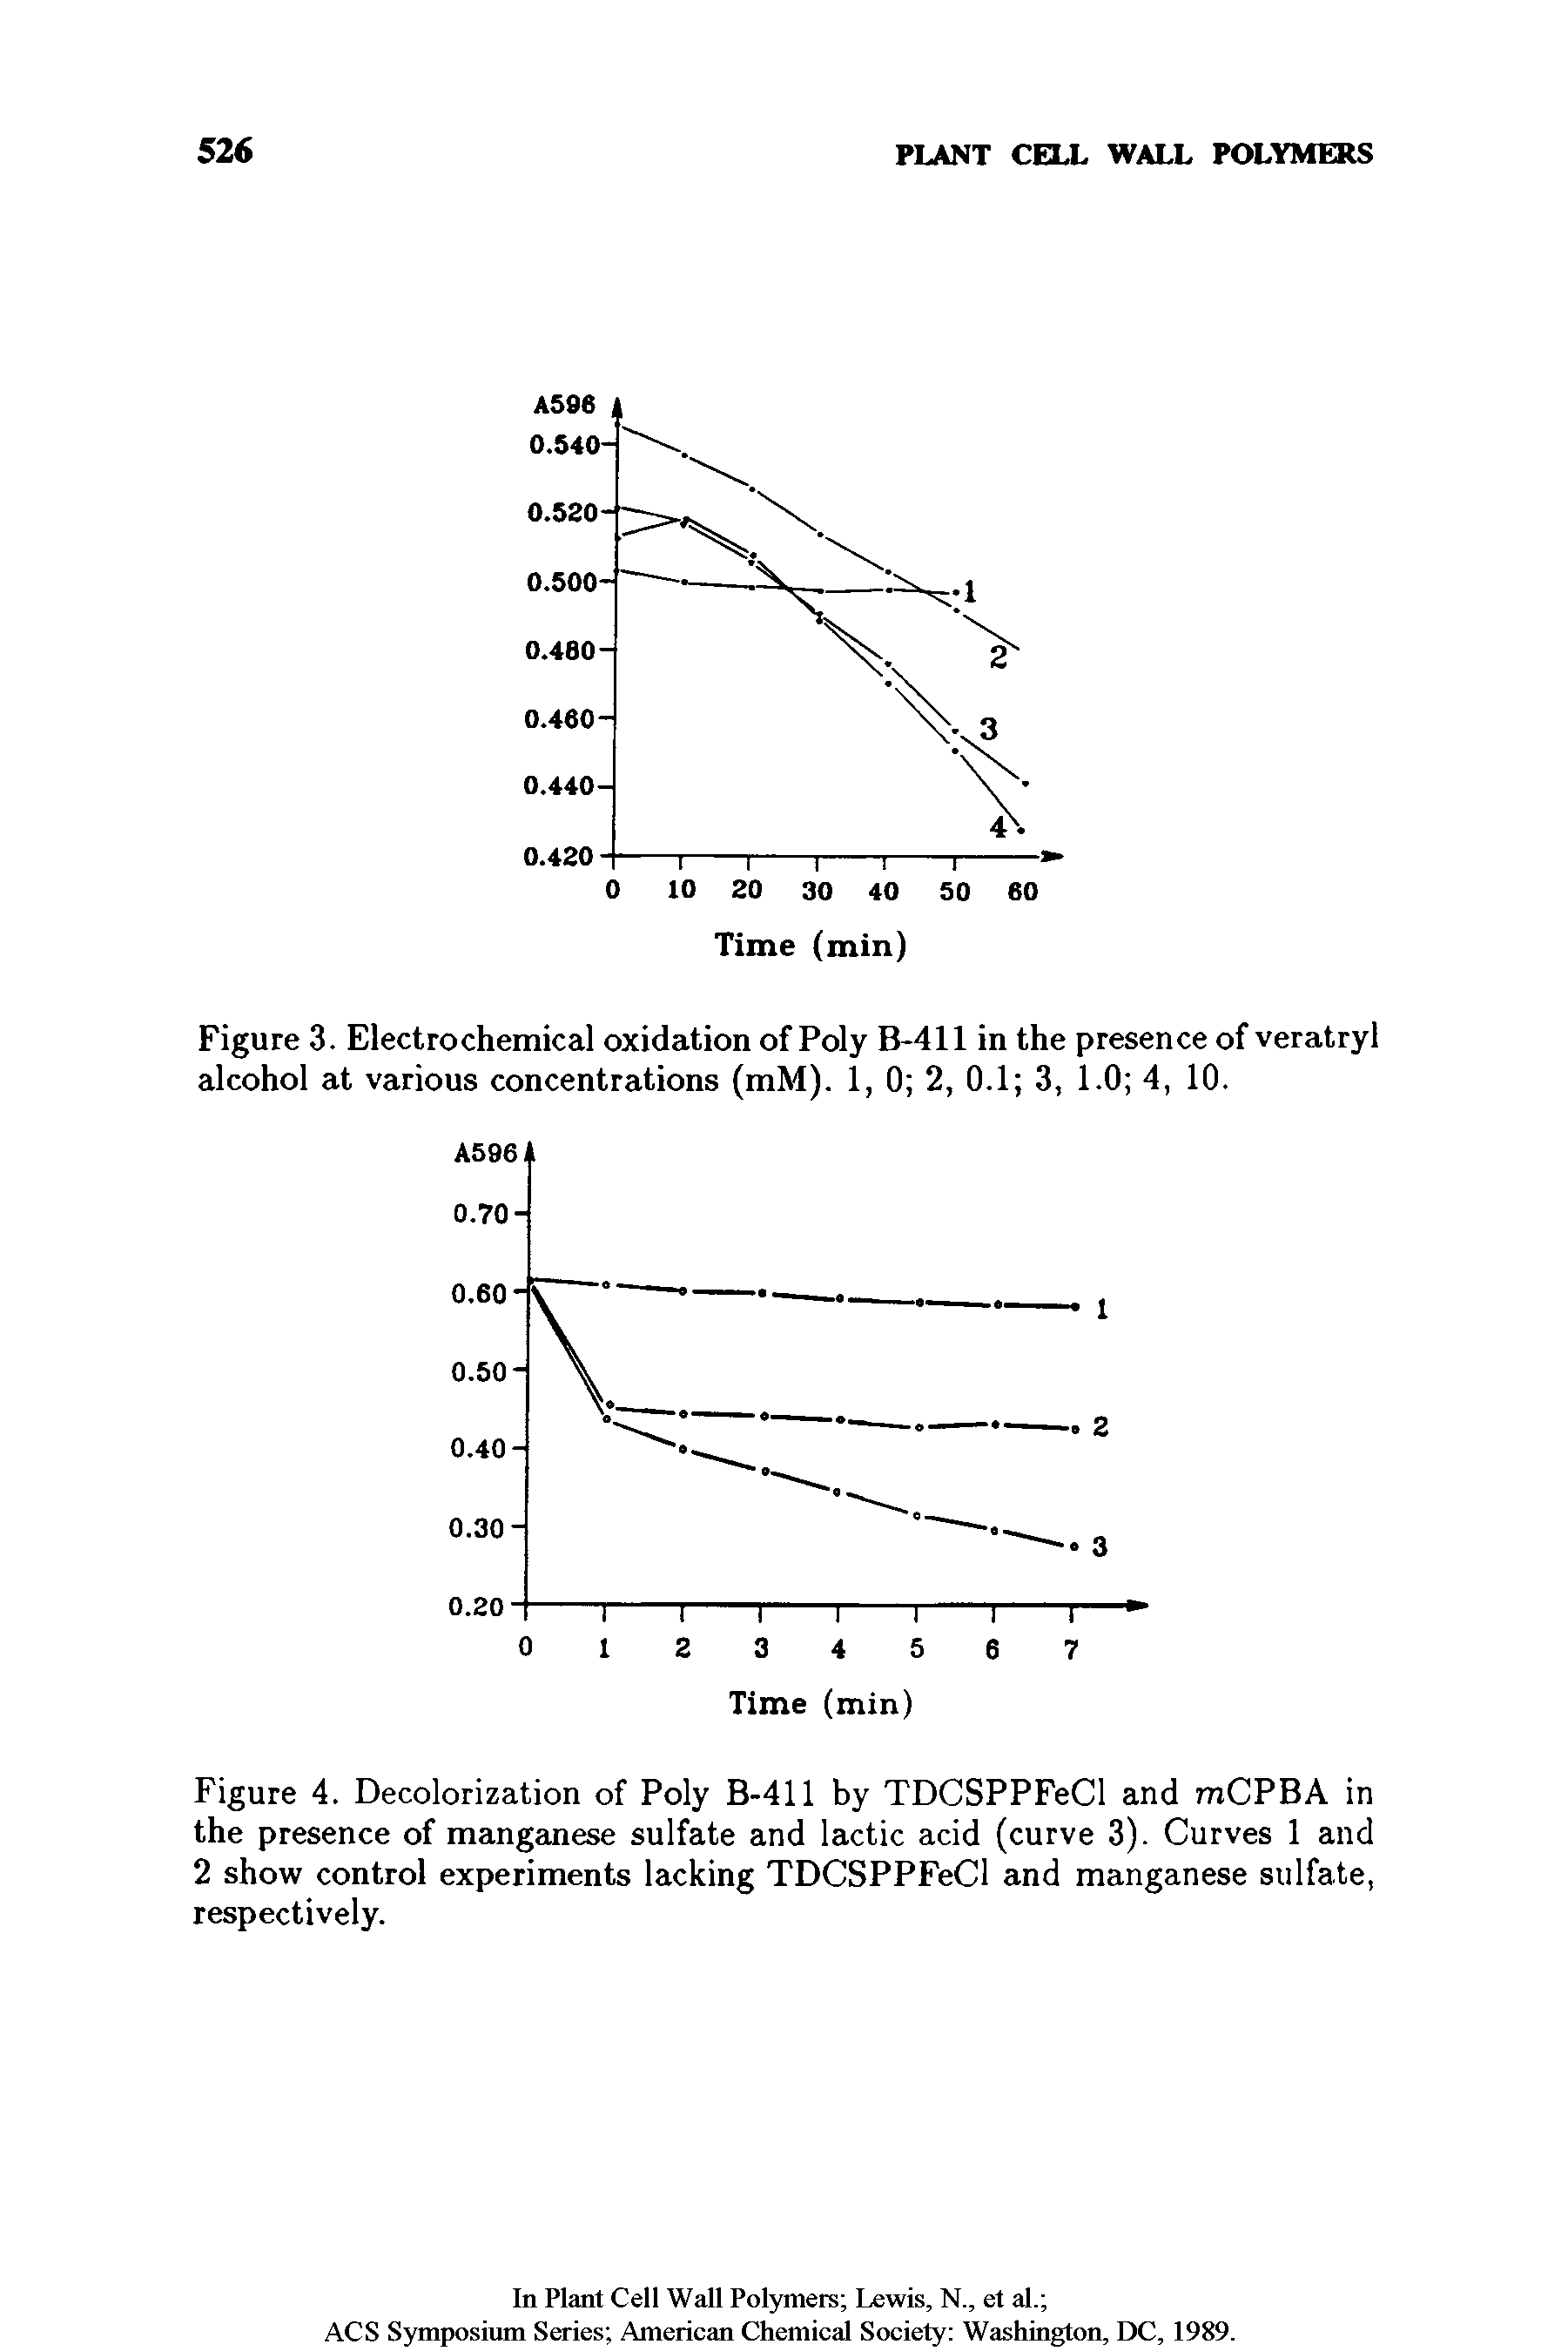 Figure 3. Electrochemical oxidation of Poly B-411 in the presence of veratryl alcohol at various concentrations (mM). 1, 0 2, 0.1 3, 1.0 4, 10.